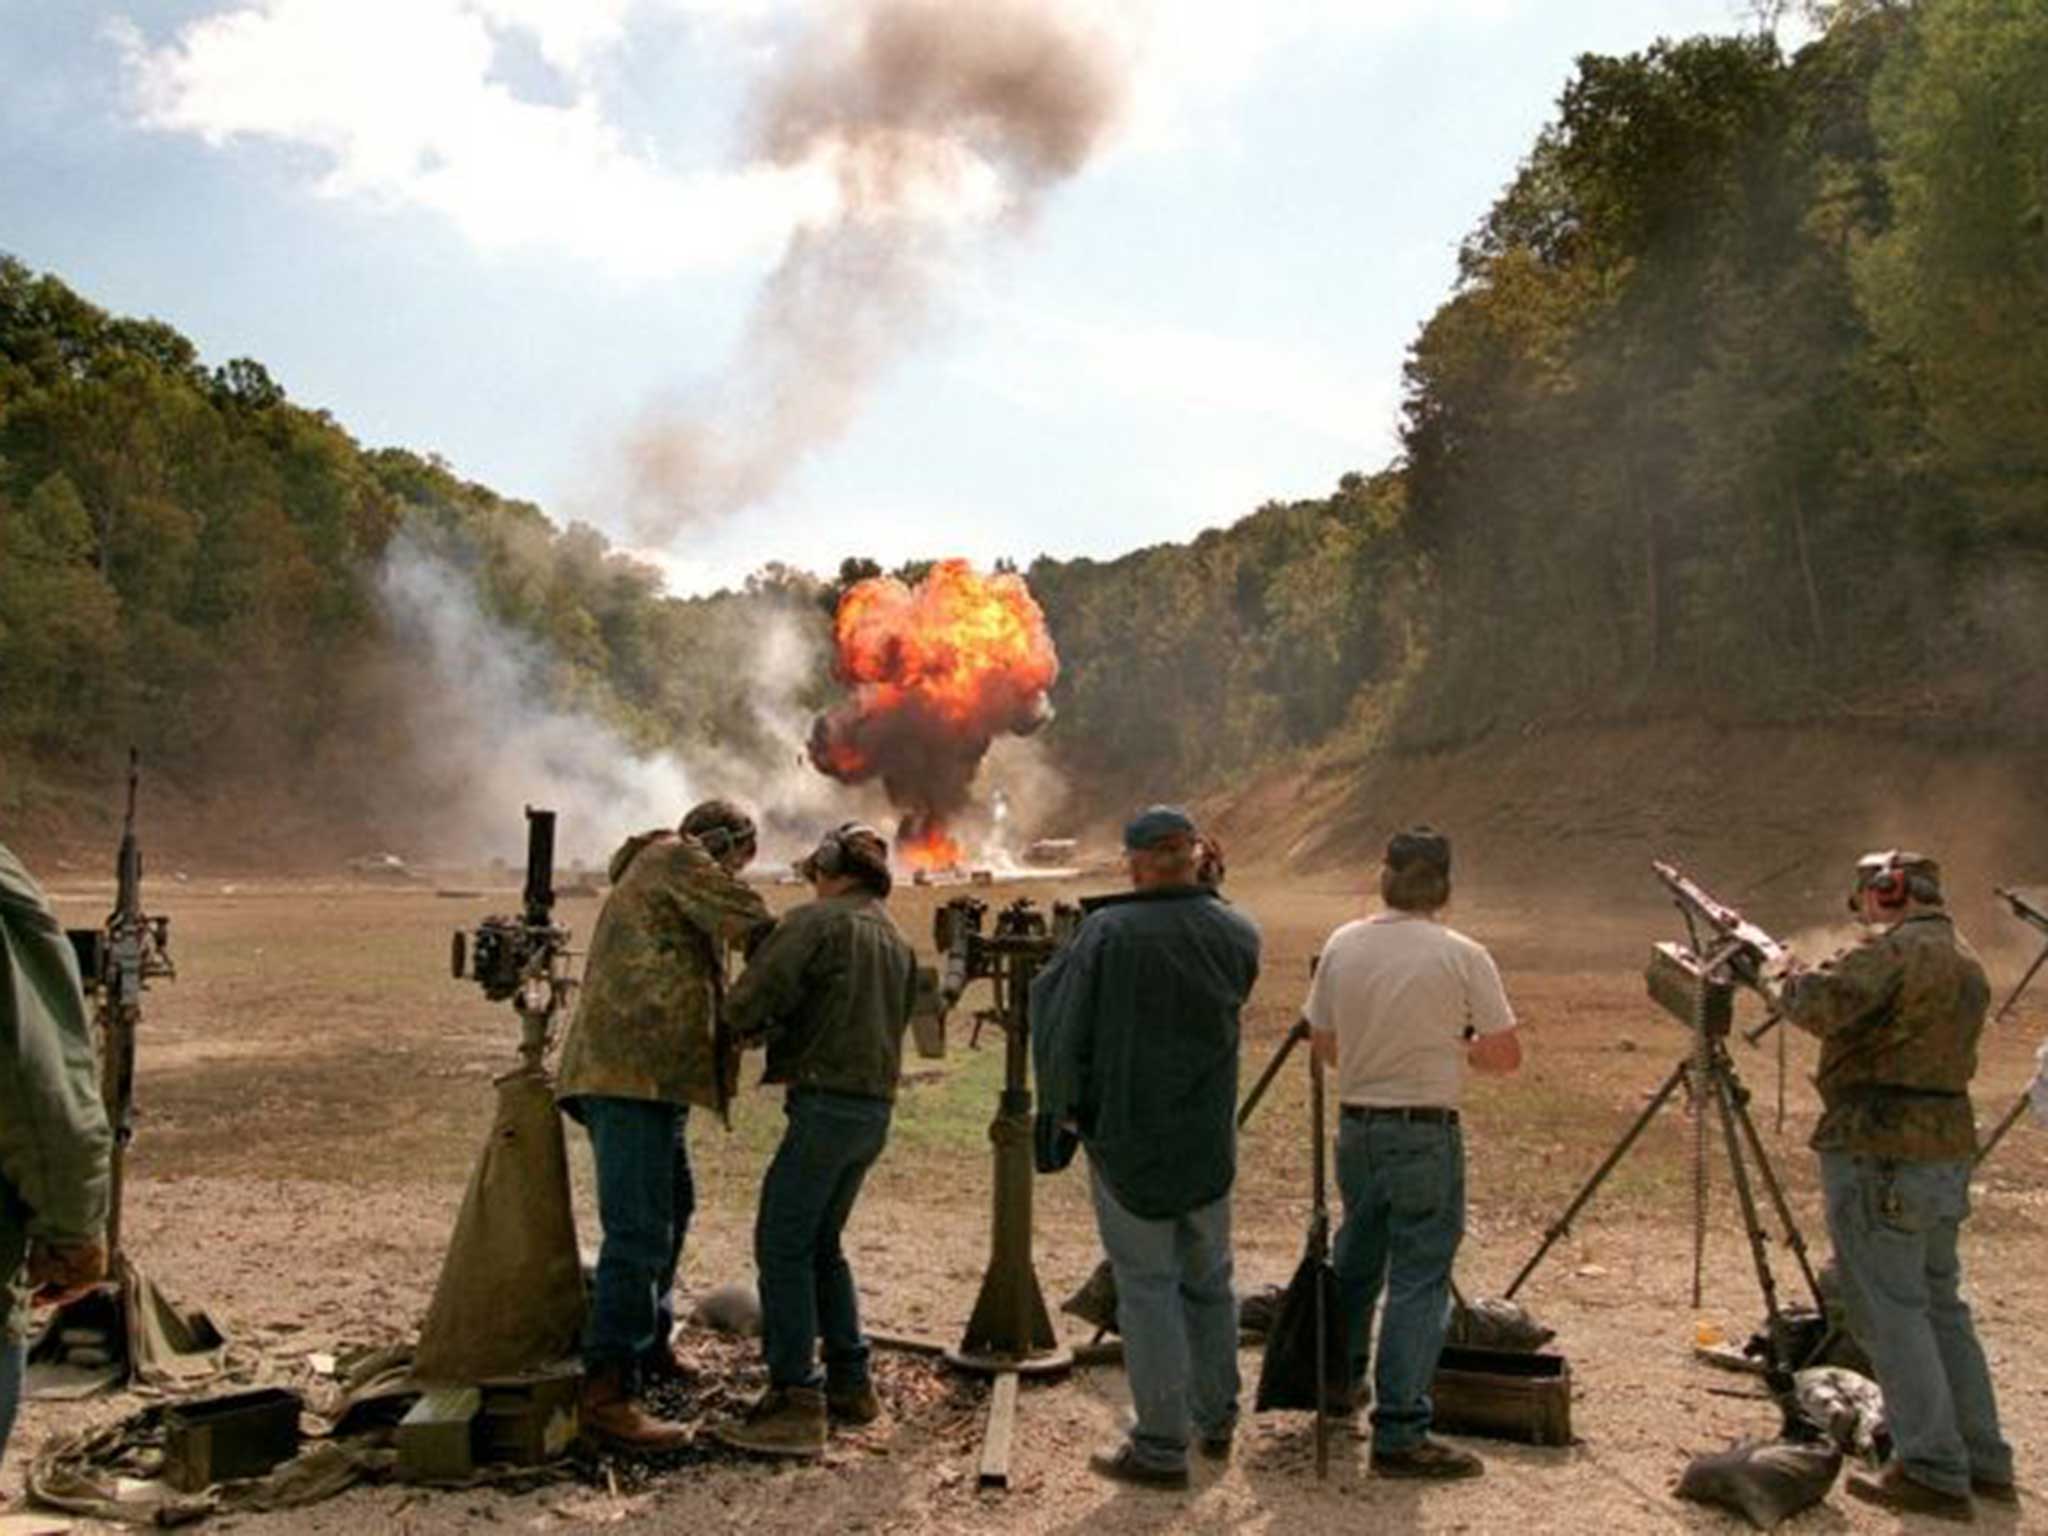 Contestants hit targets filled with explosives at Knob Creek, which attracts 10,000 gun enthusiasts